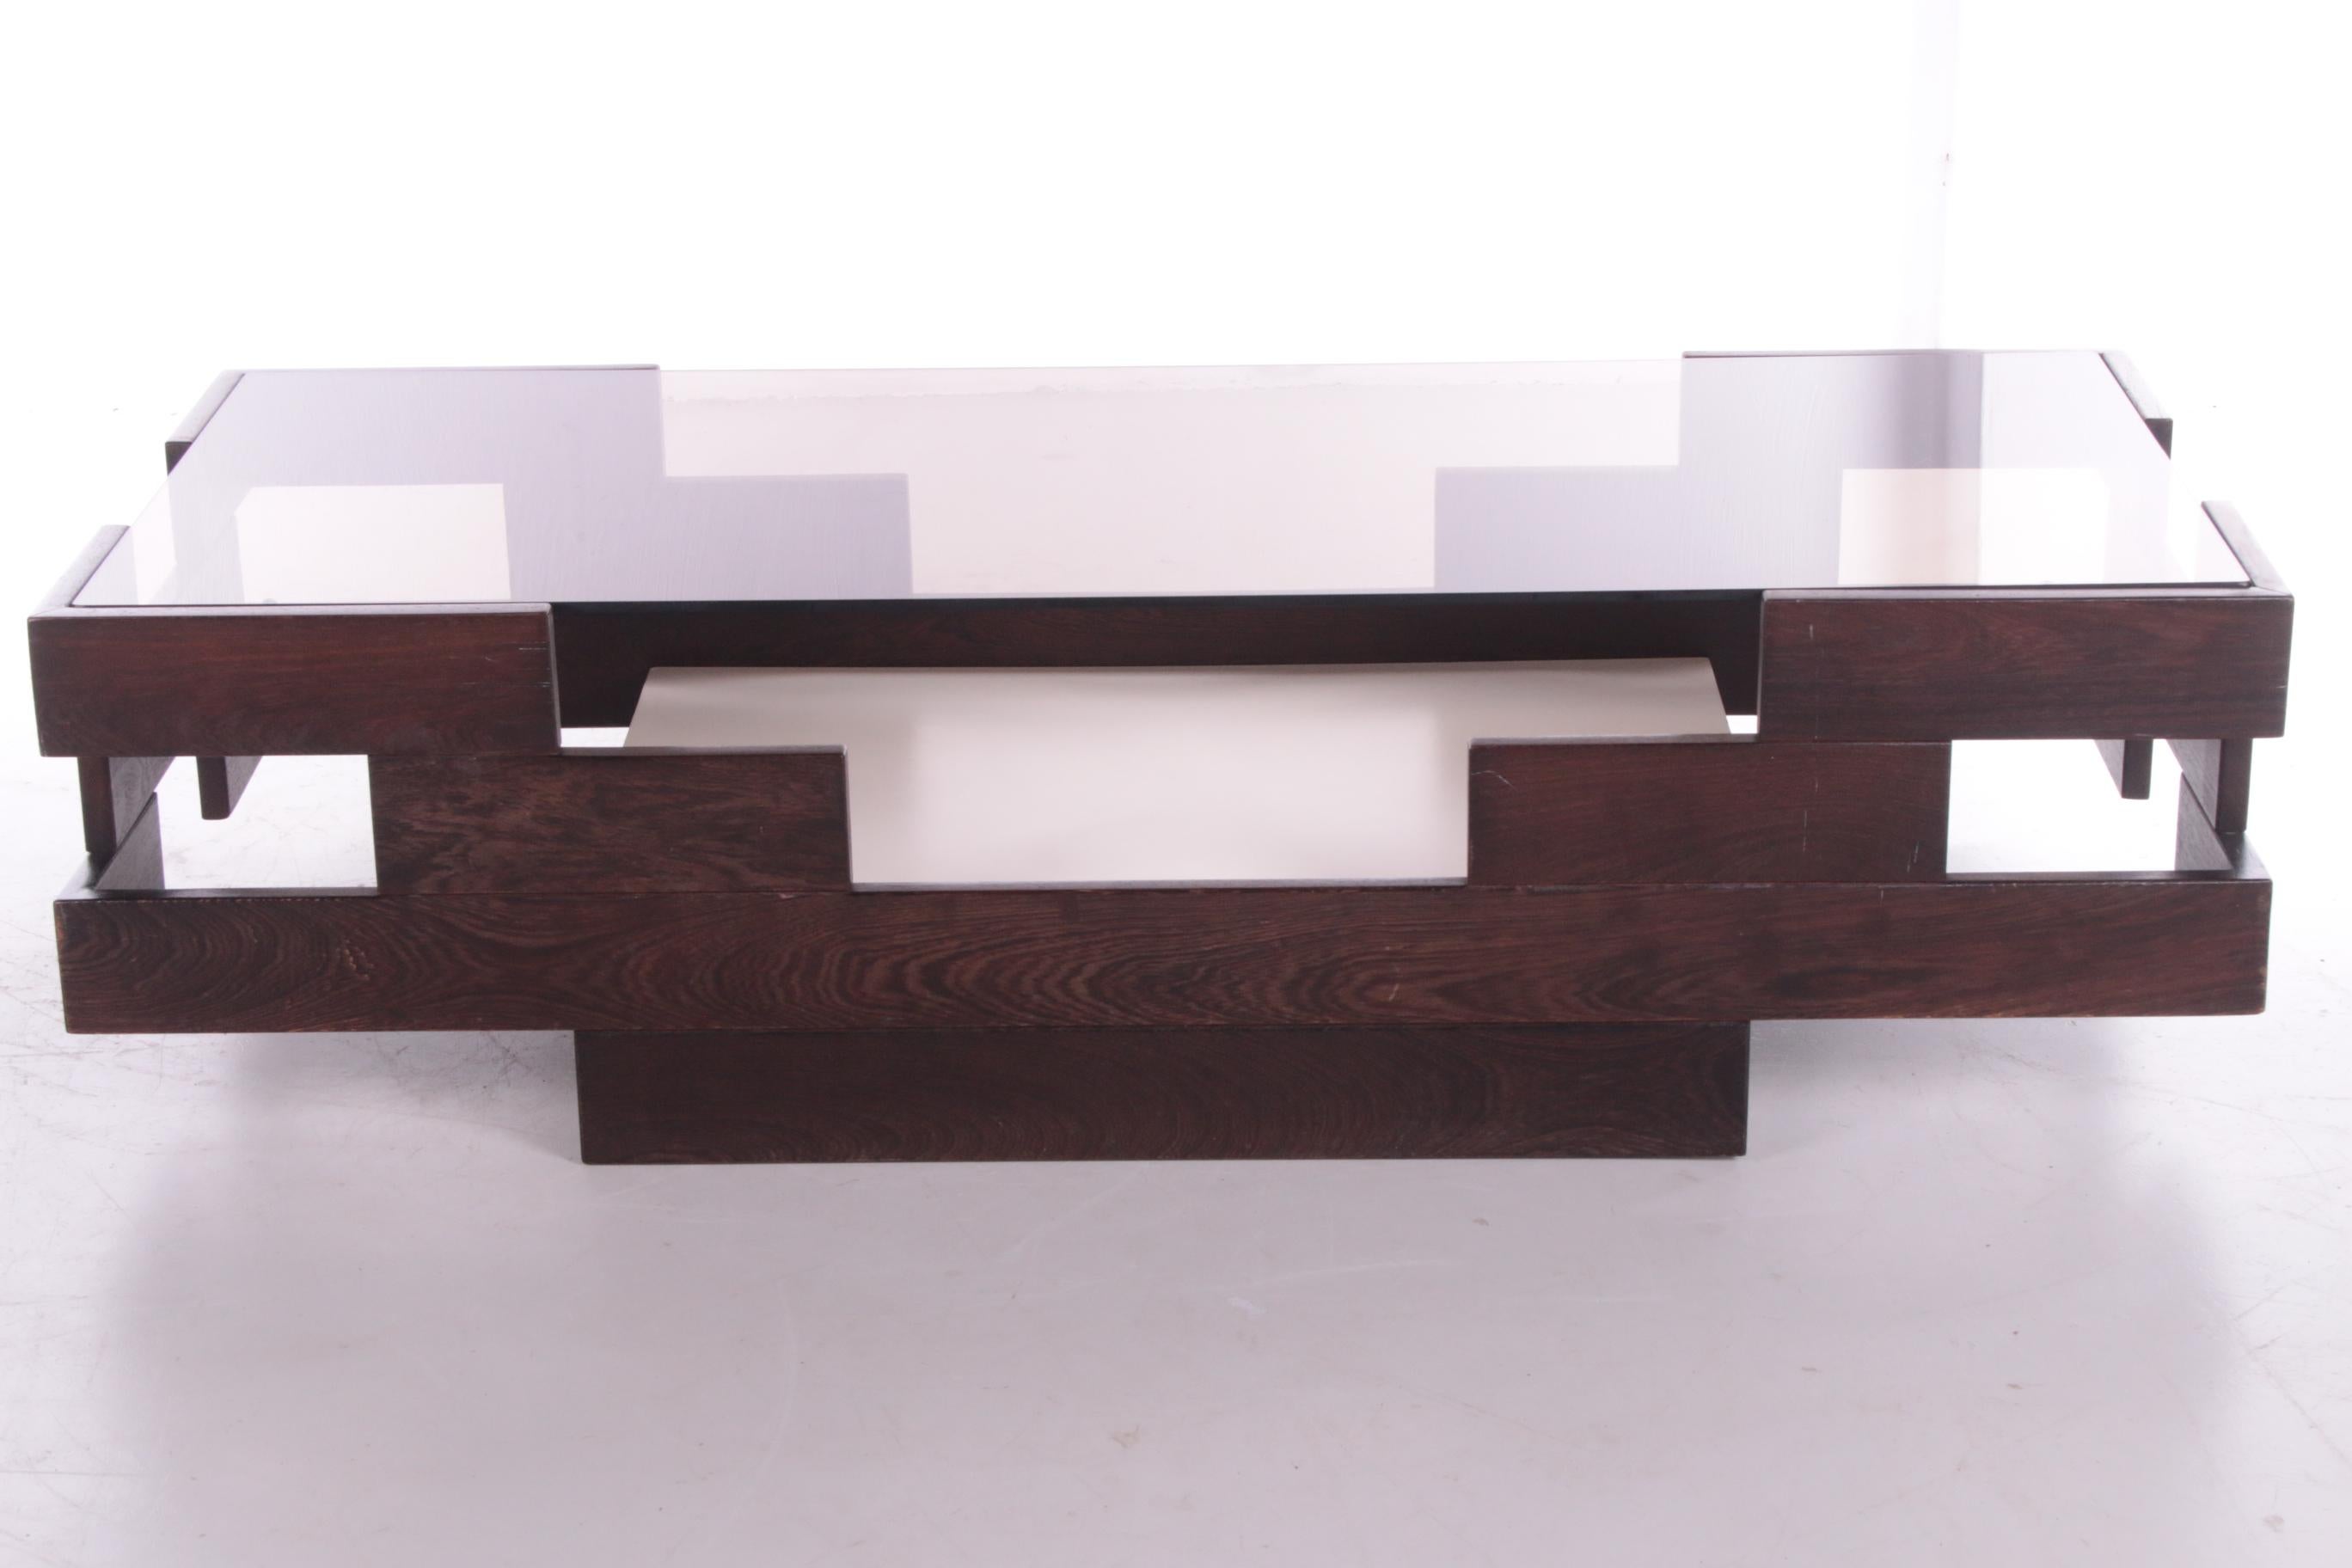 Dutch Vintage Space Age Coffee Table Made of Wenge Wood, 1960s